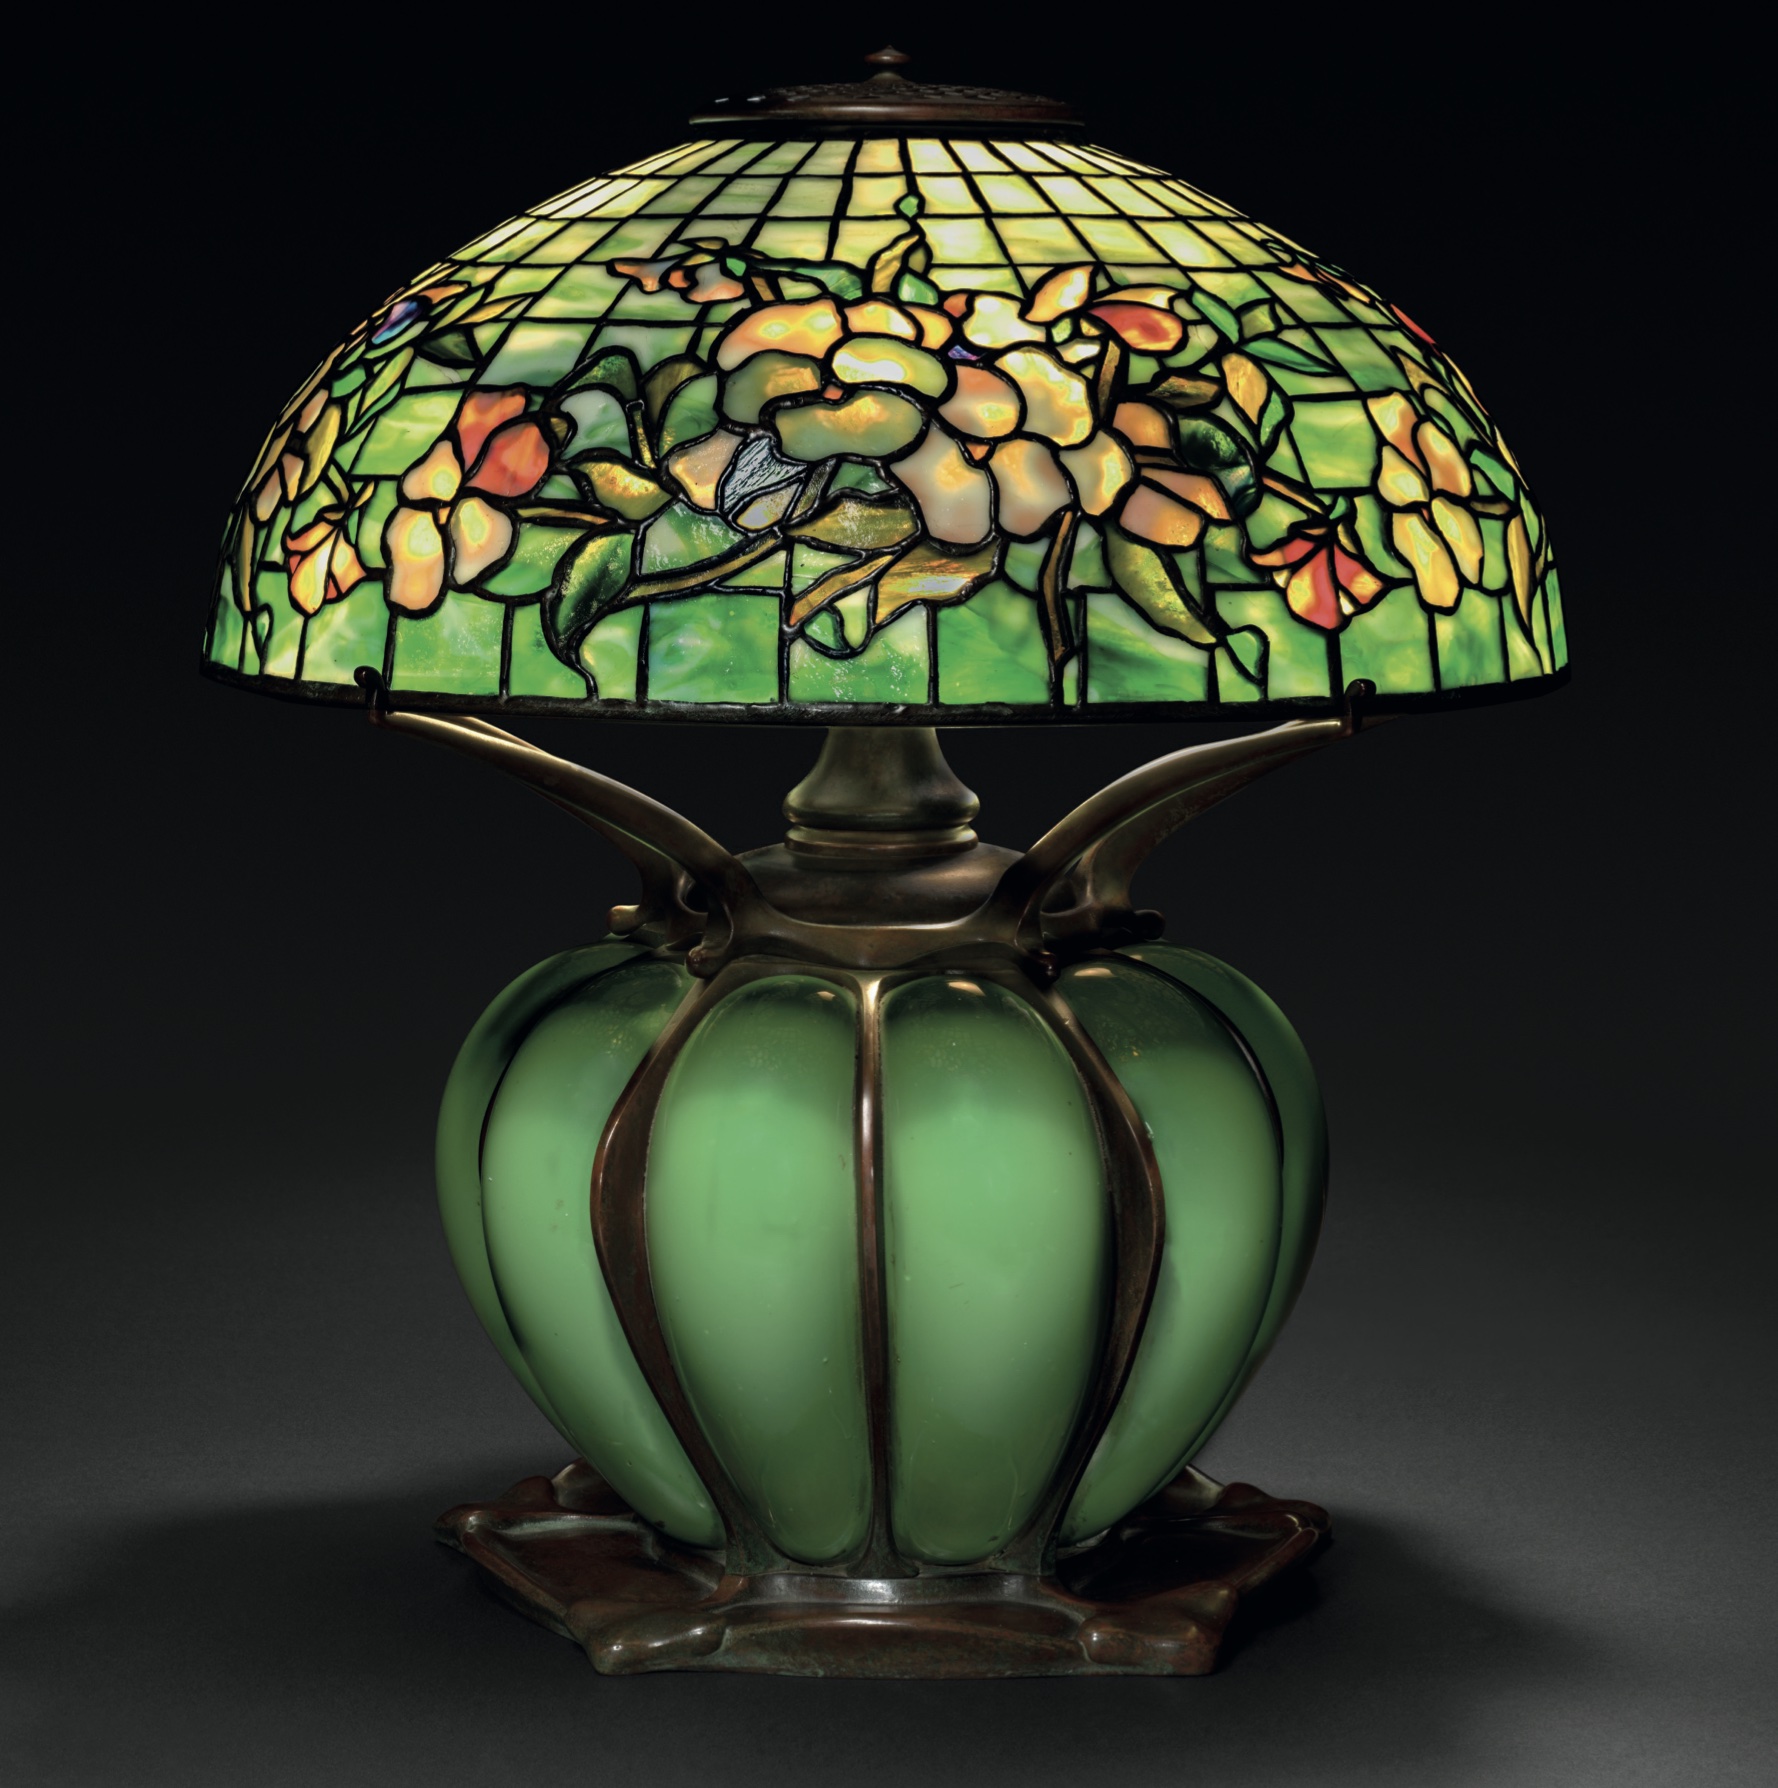 Antique pansy border table lamp by Tiffany